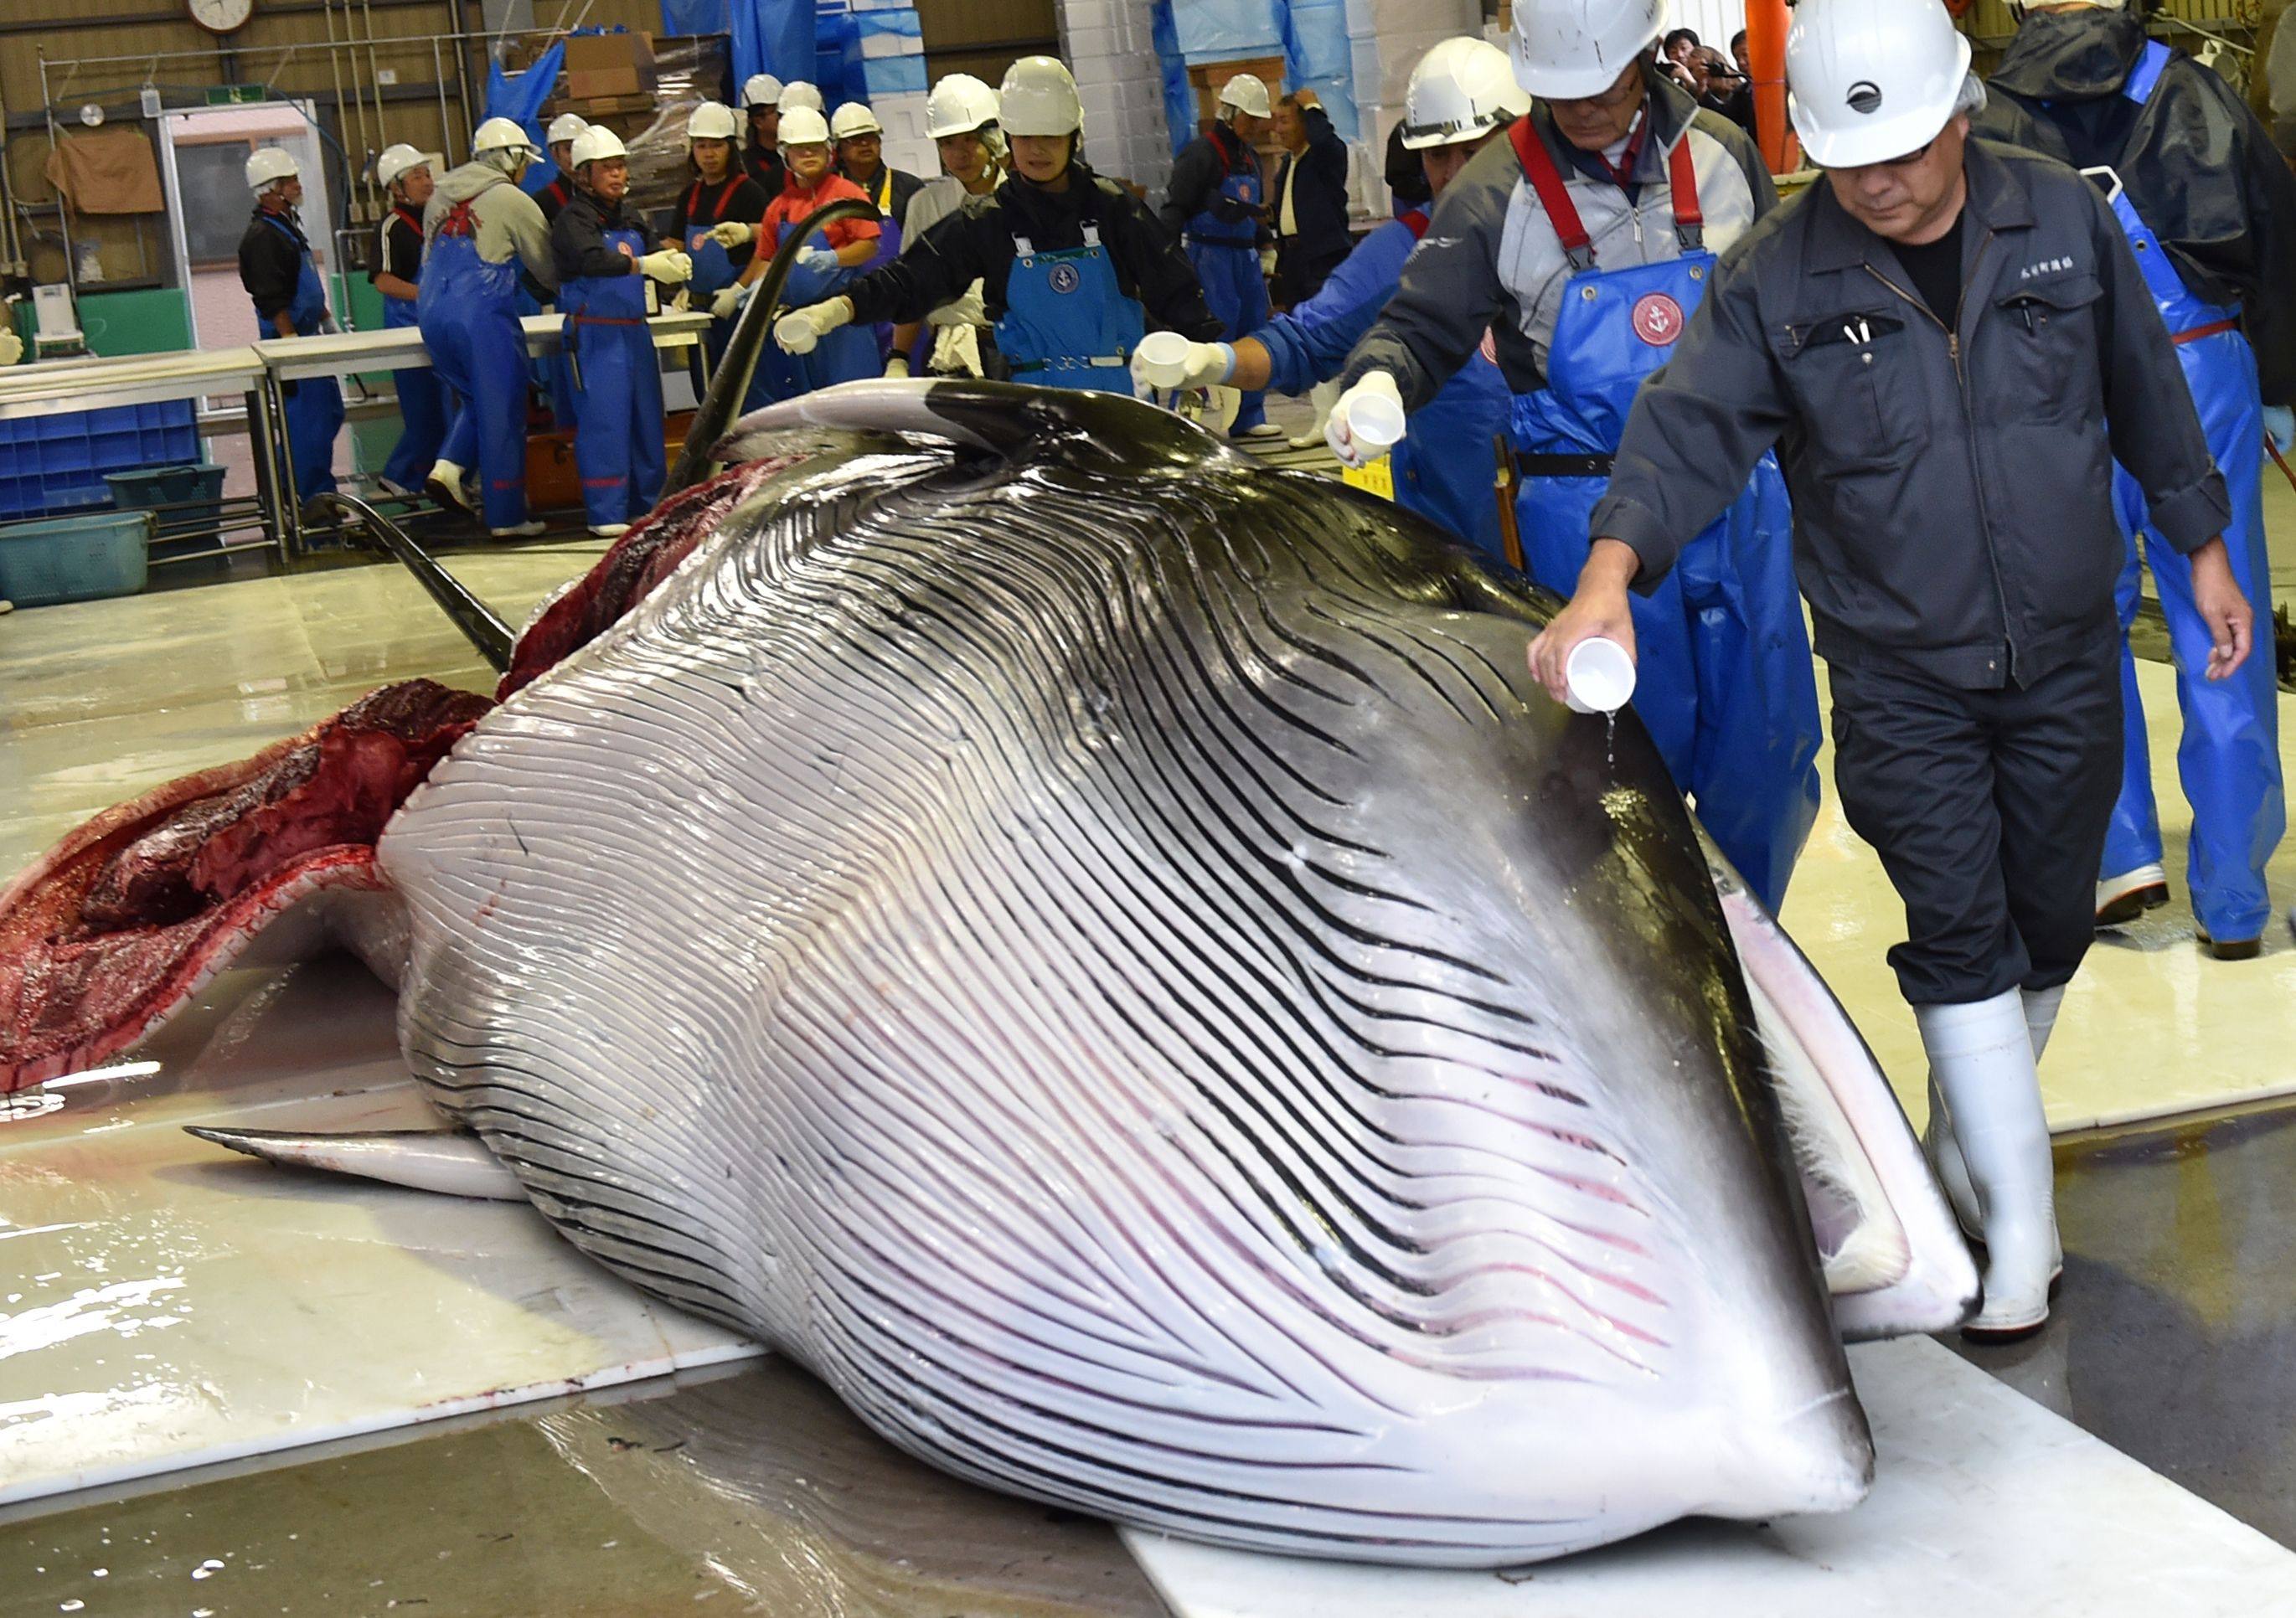 A whale is unloaded in Hokkaido in 2019 after Japan resumed commercial hunting of the marine mammals. Photo: AFP